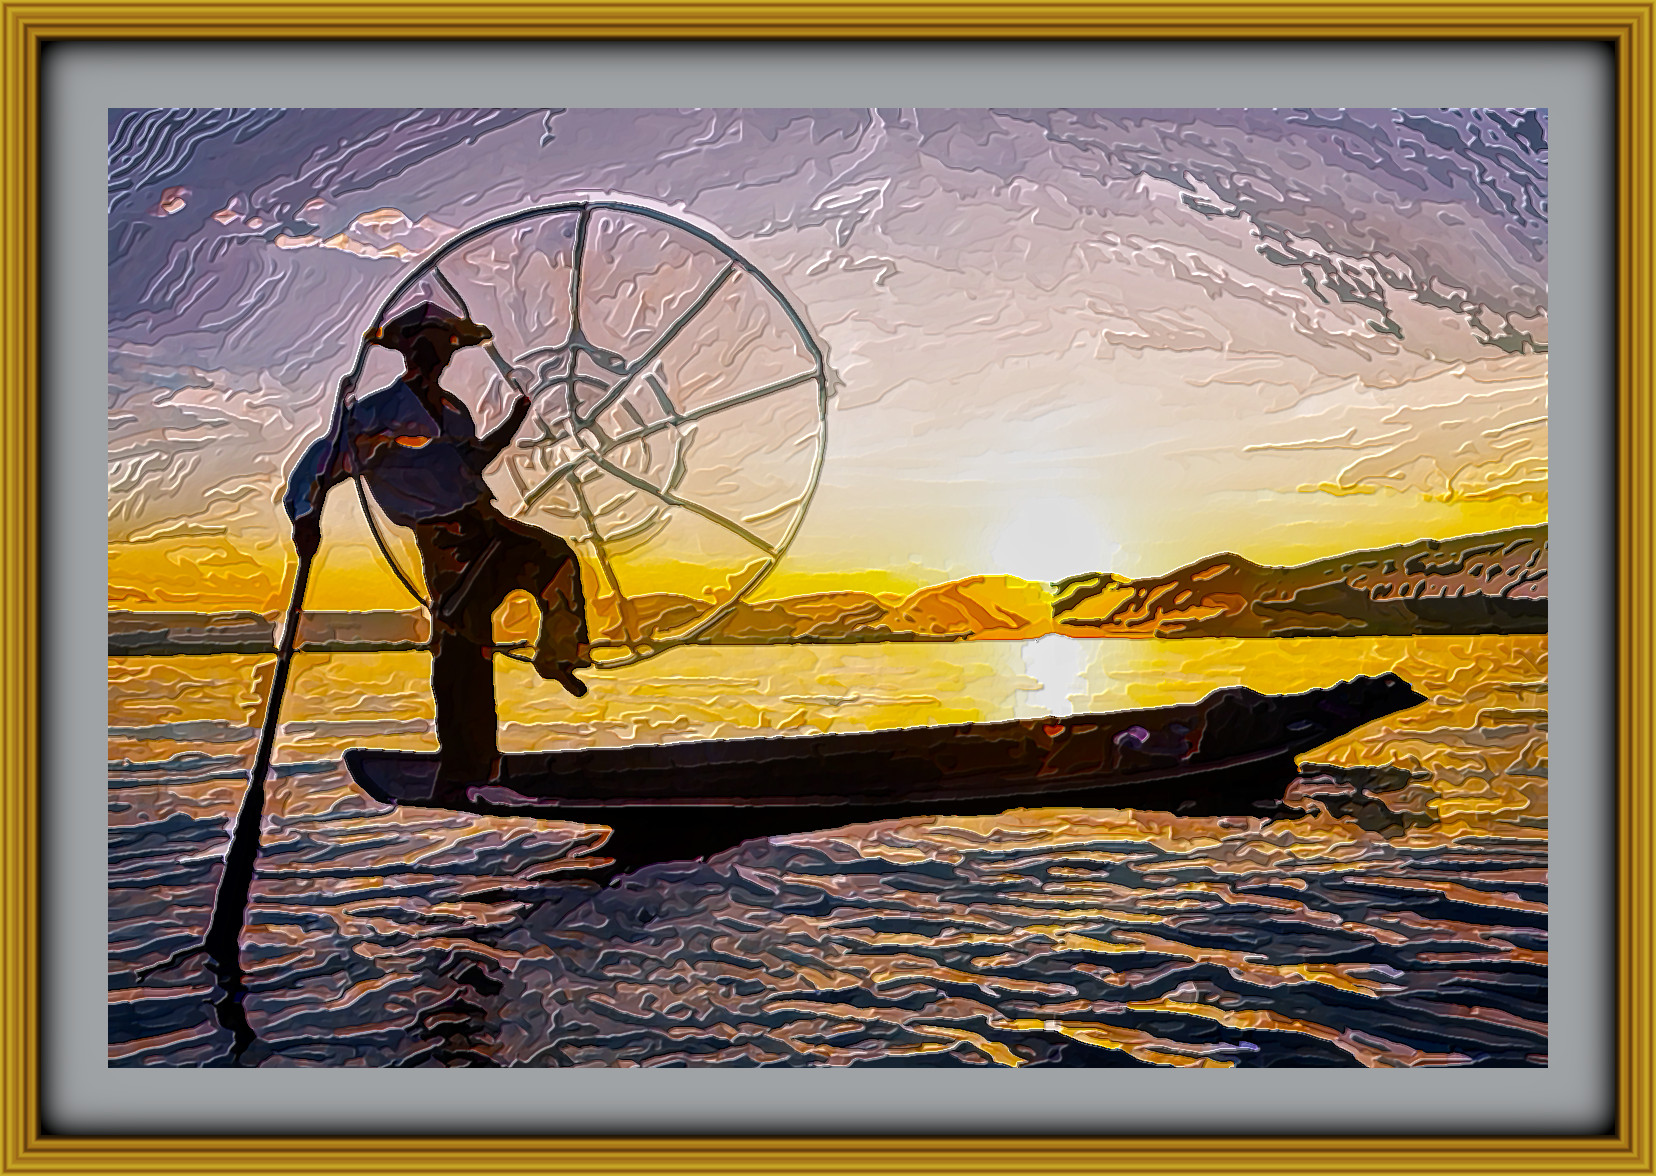 2024-02-15 10-11-33 Inle_Lake_Sunset_Fisherman_Myanmar_Colby_Brown with JVID Embossed Graphic Effect, parms=1, 127.0, 6.0, 8.0, 7.5, 9.75, 1.5, 0.0, 0.jpeg